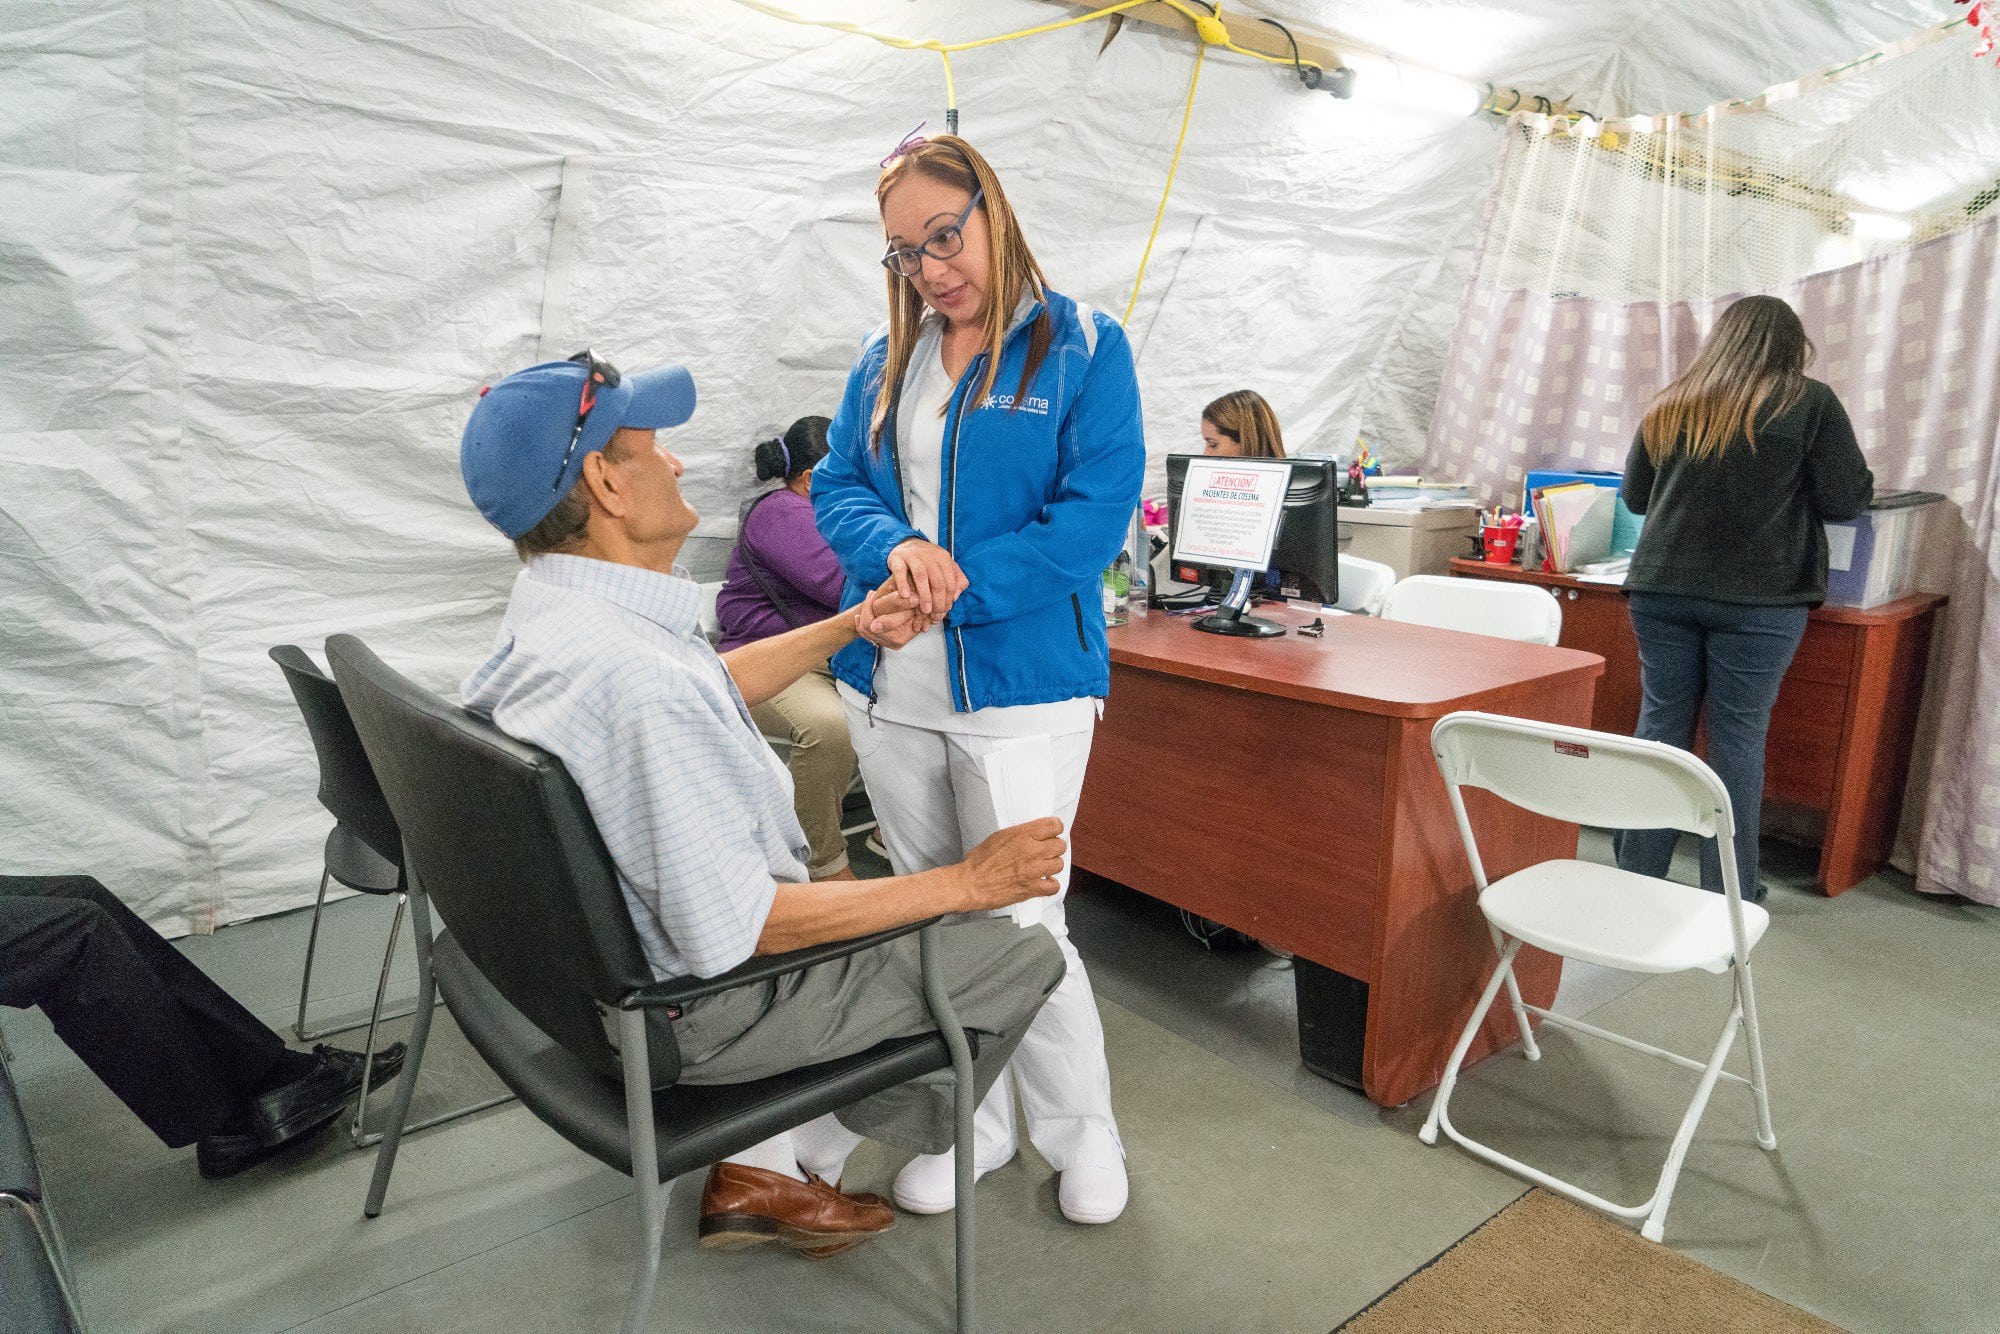 patient cared for in deployable medical shelter